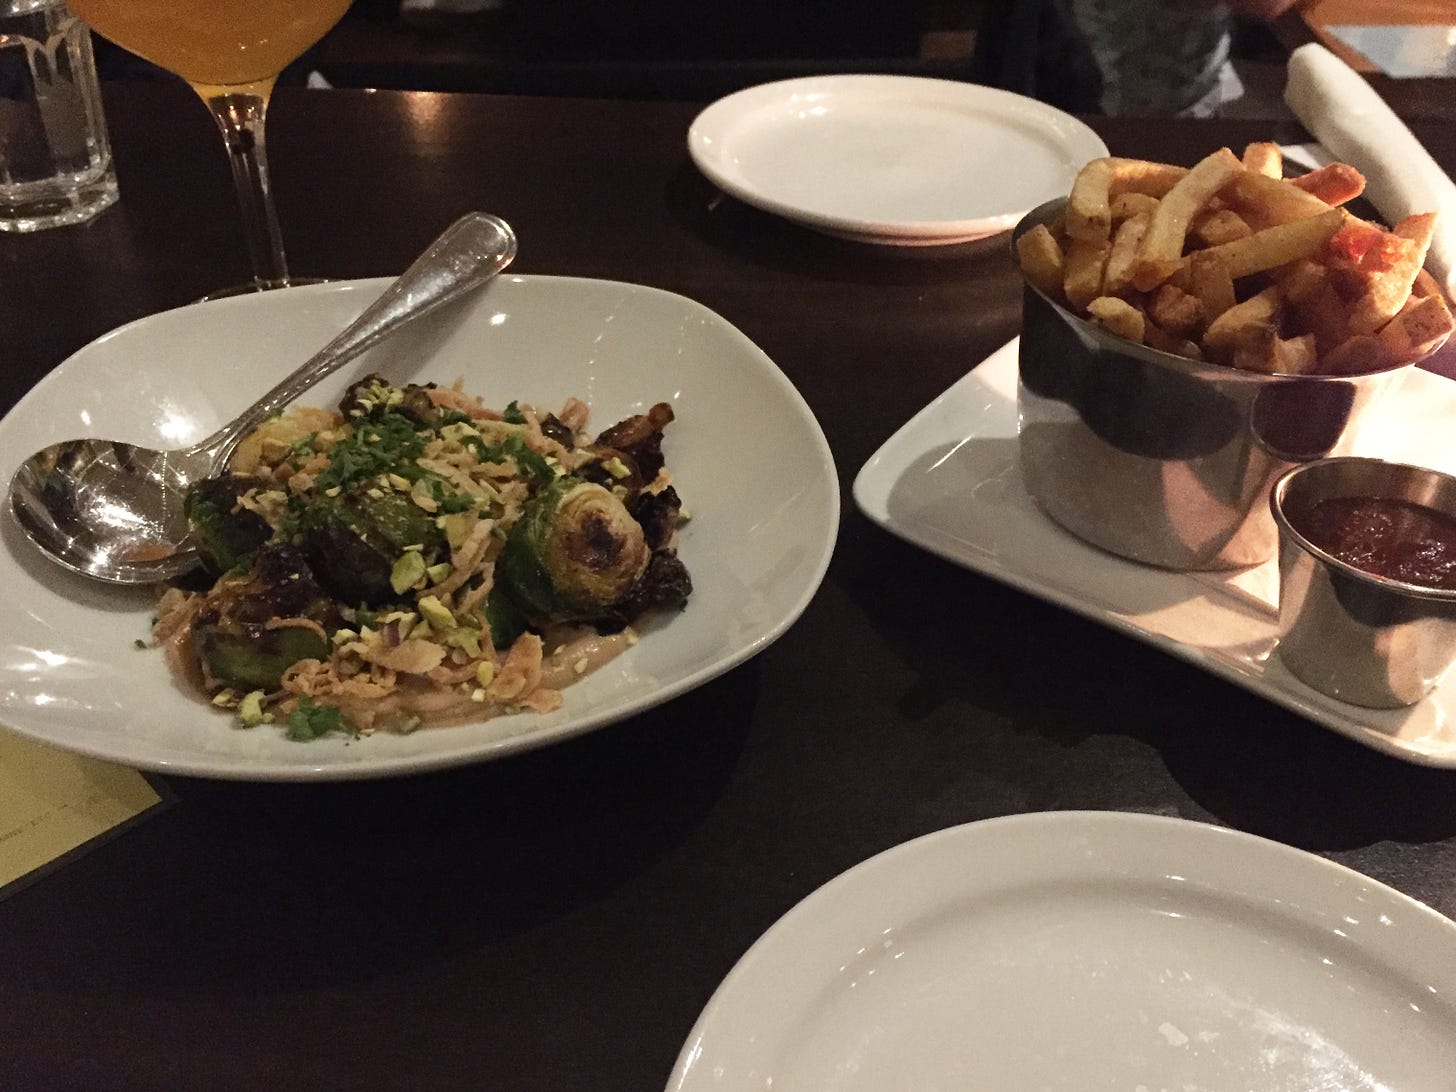 two dishes in the centre of a dark table, one with brussels sprouts covered in crisp fried shallots and nuts, the other a plate holding a metal cup of fries and a small metal ramekin of ketchup. Two side plates are visible in the background and foreground.